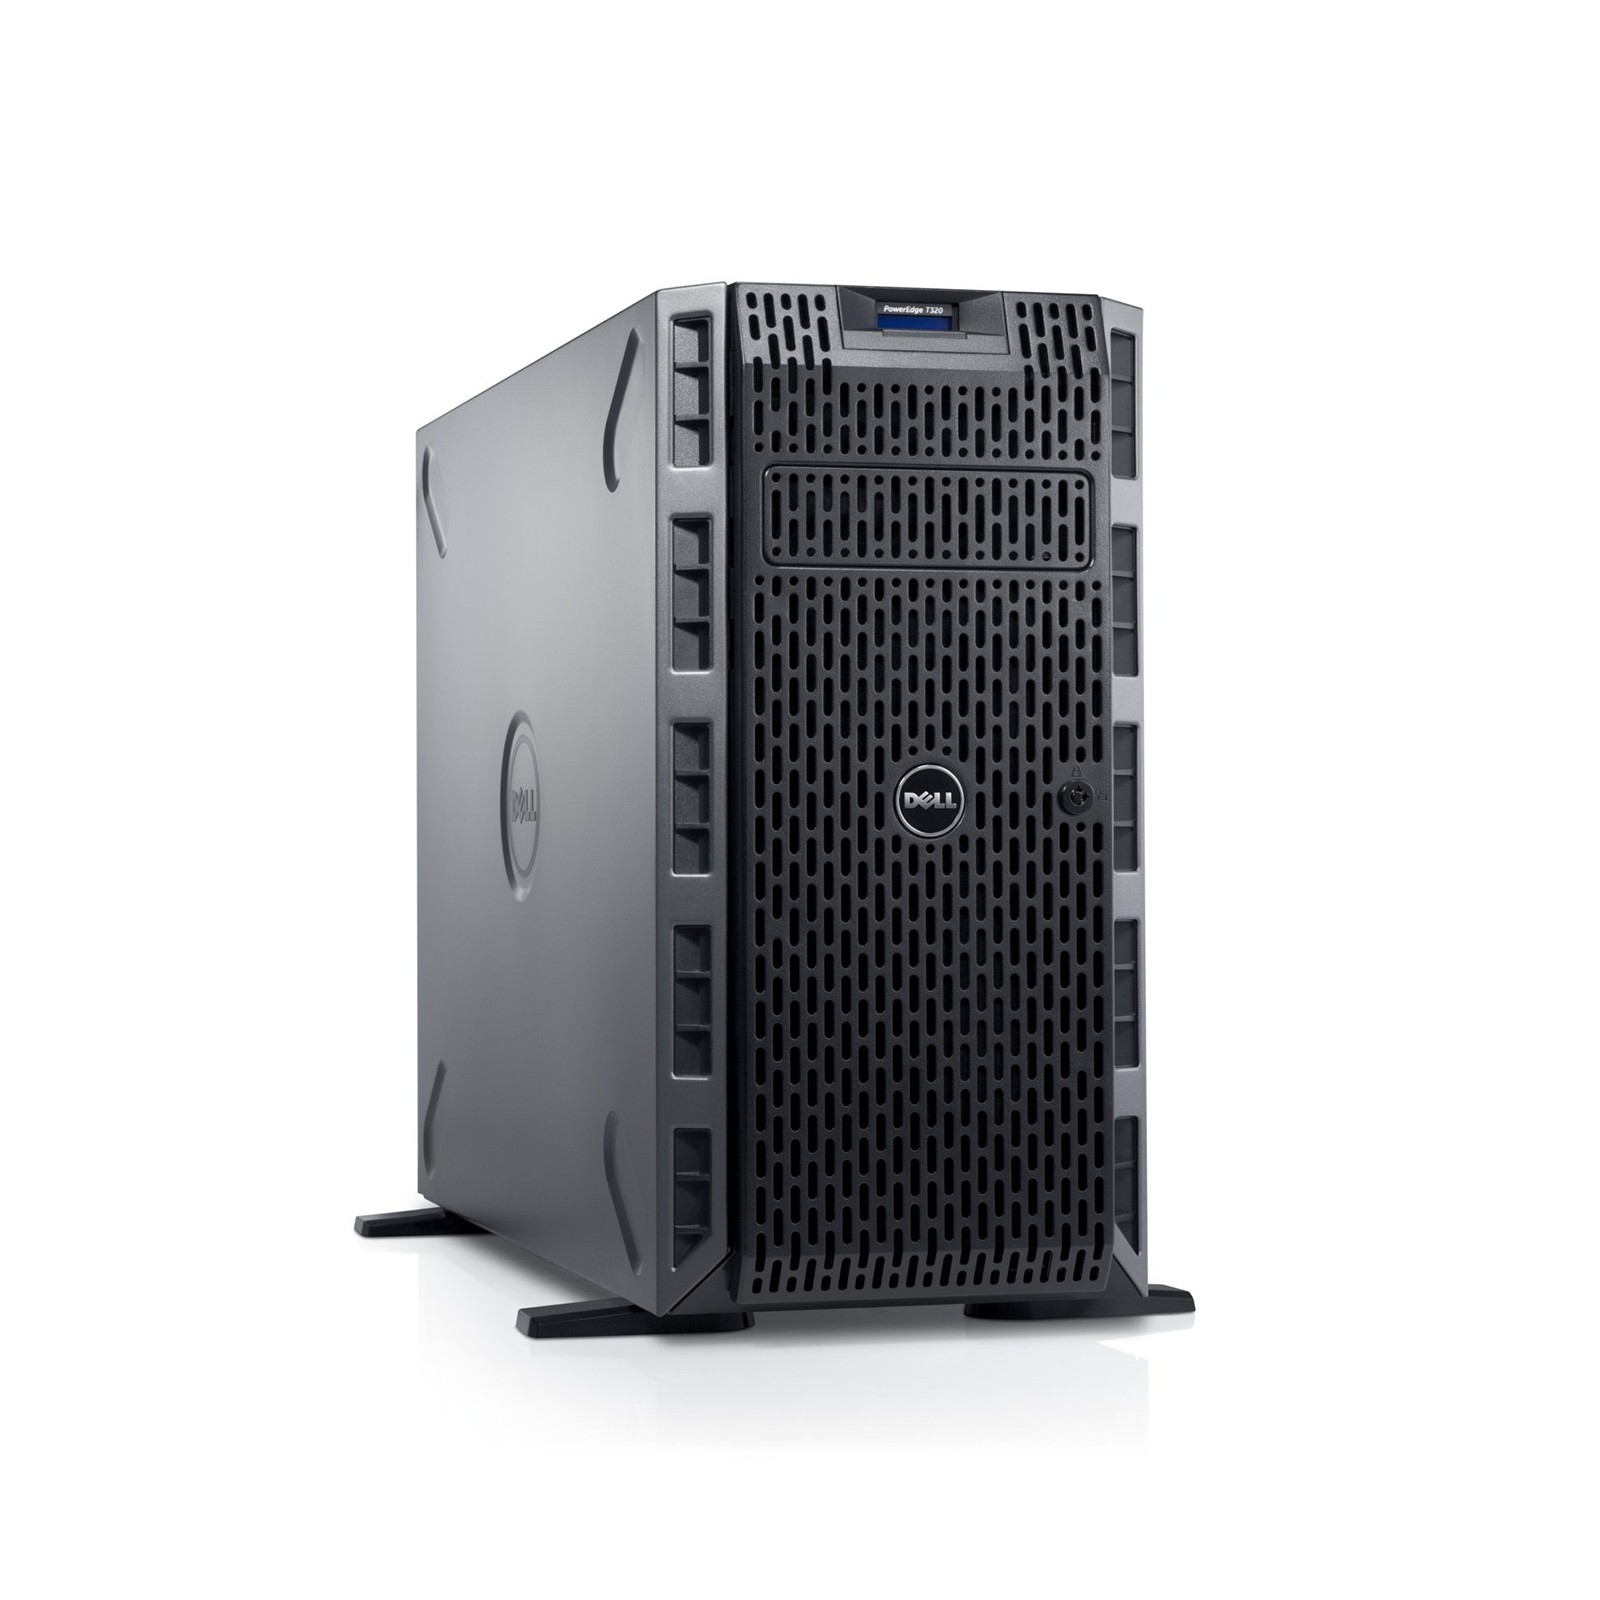 Dell PowerEdge T320 16x 2.5" (LFF) Tower Server Front